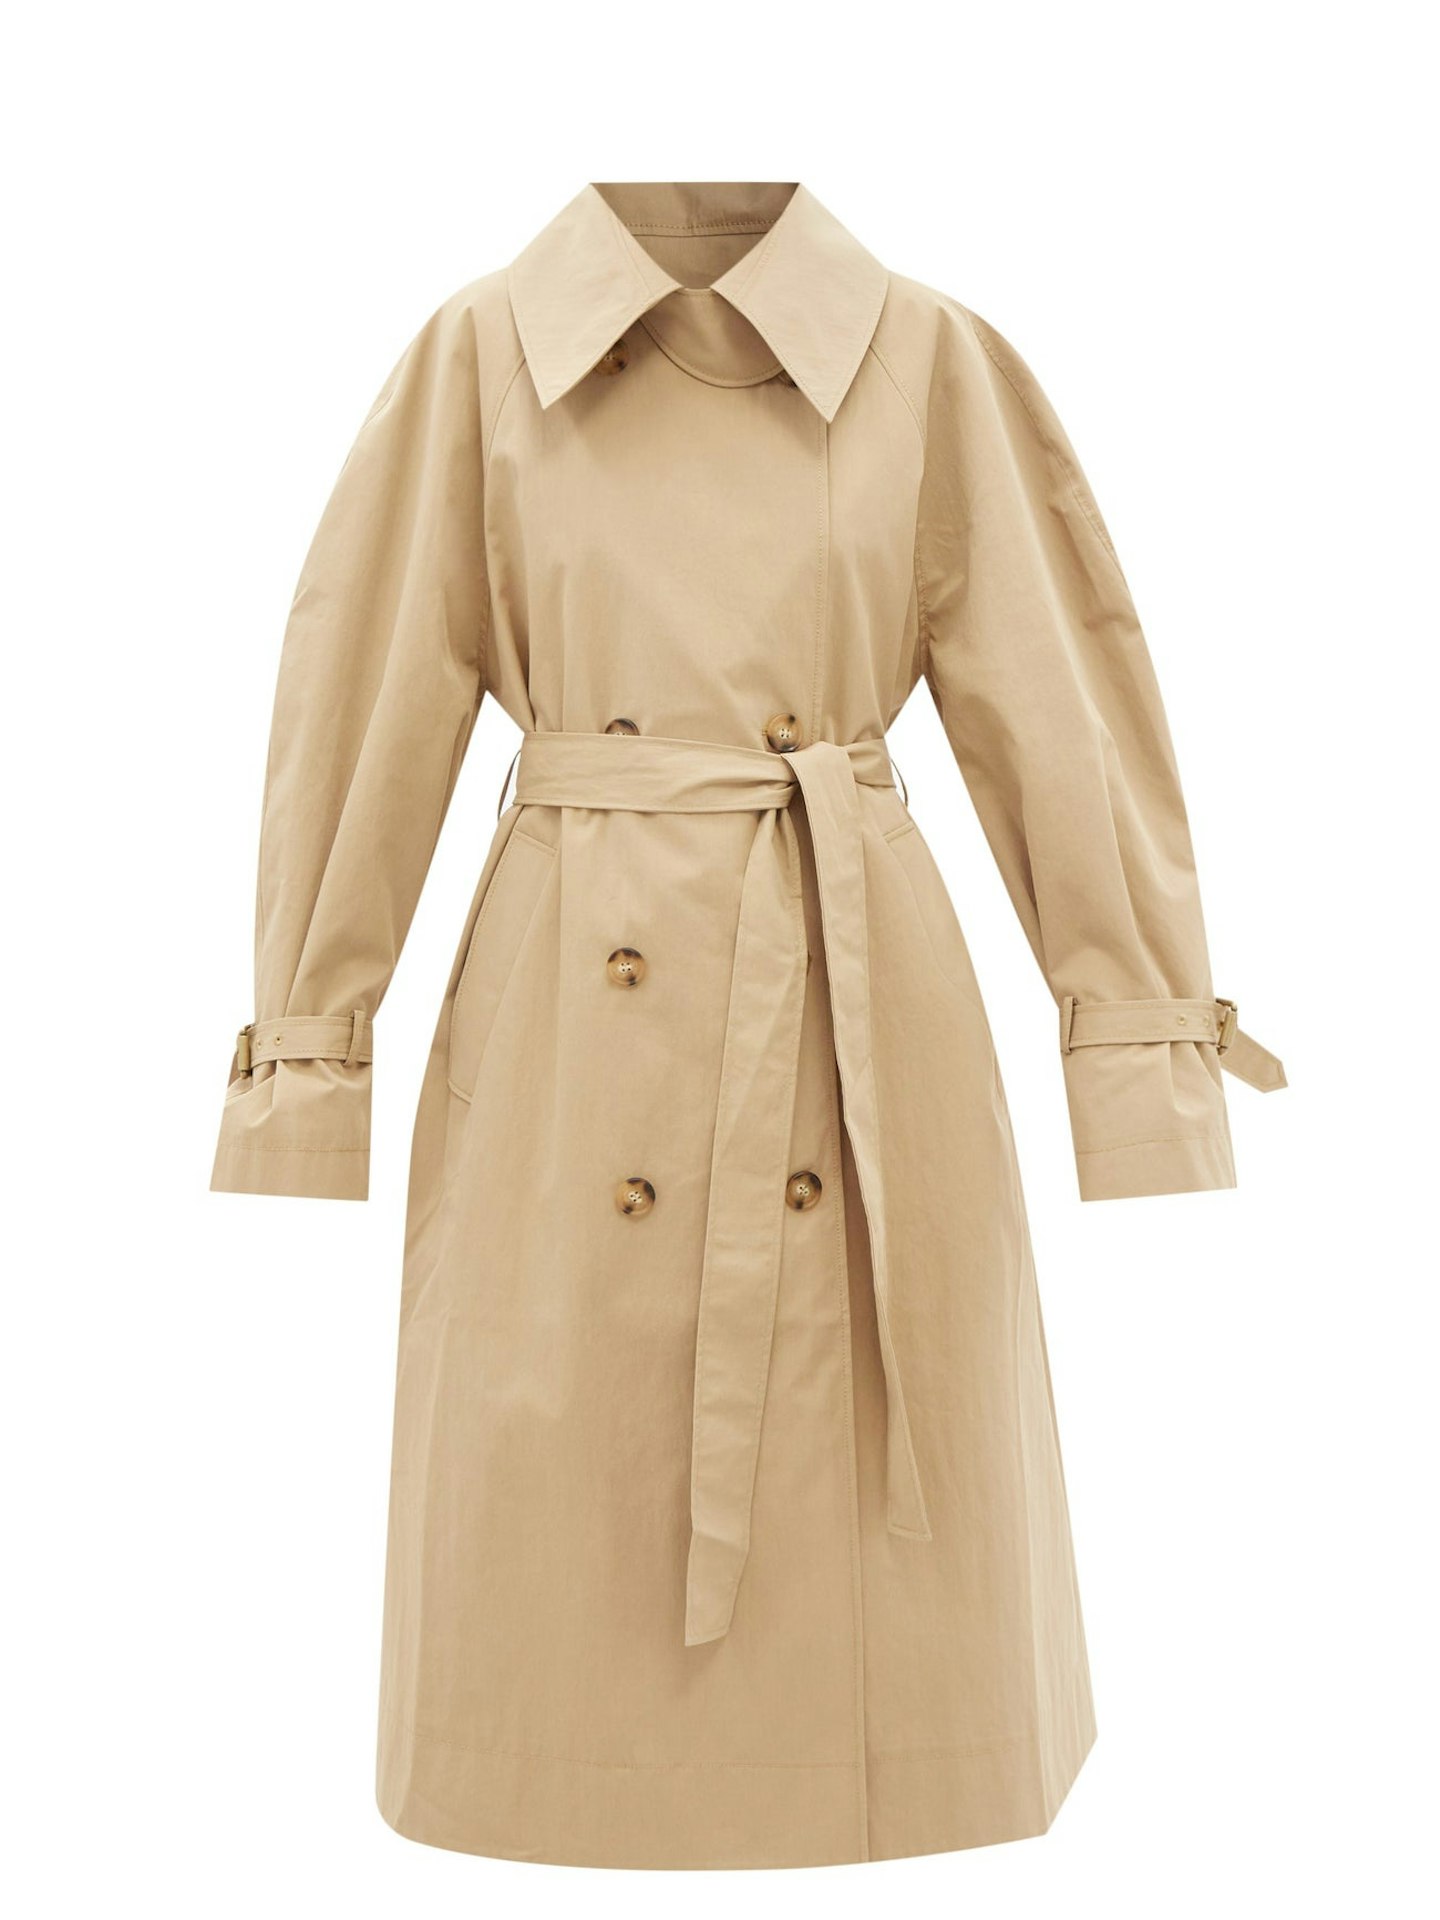 best trench coats for women Rejina Pyo, Romy Belted Twill Trench Coat, £695